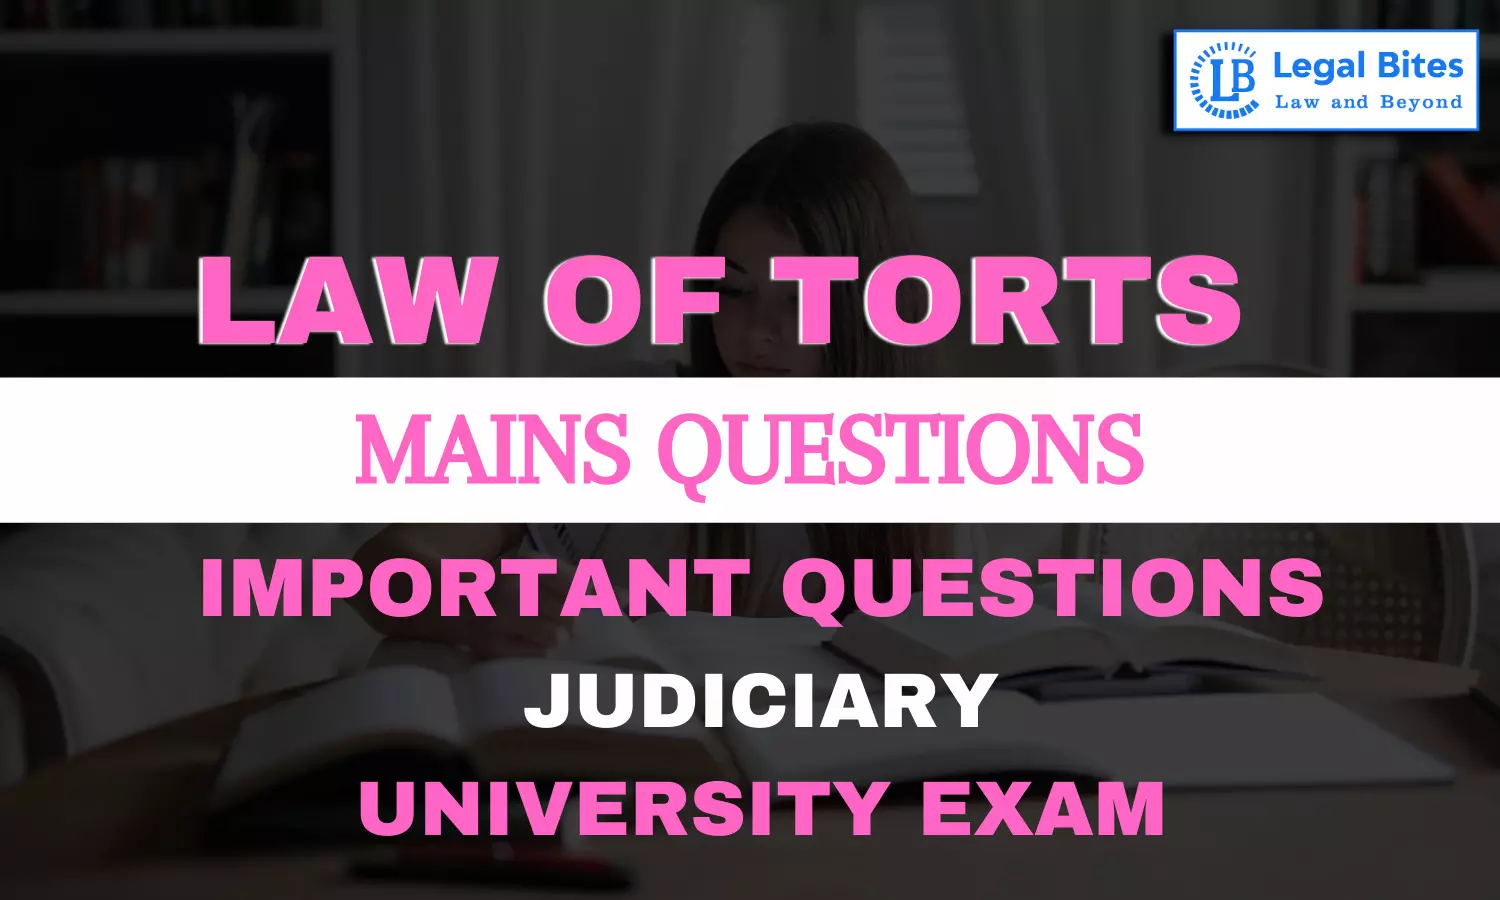 Is an infant liable for Torts?